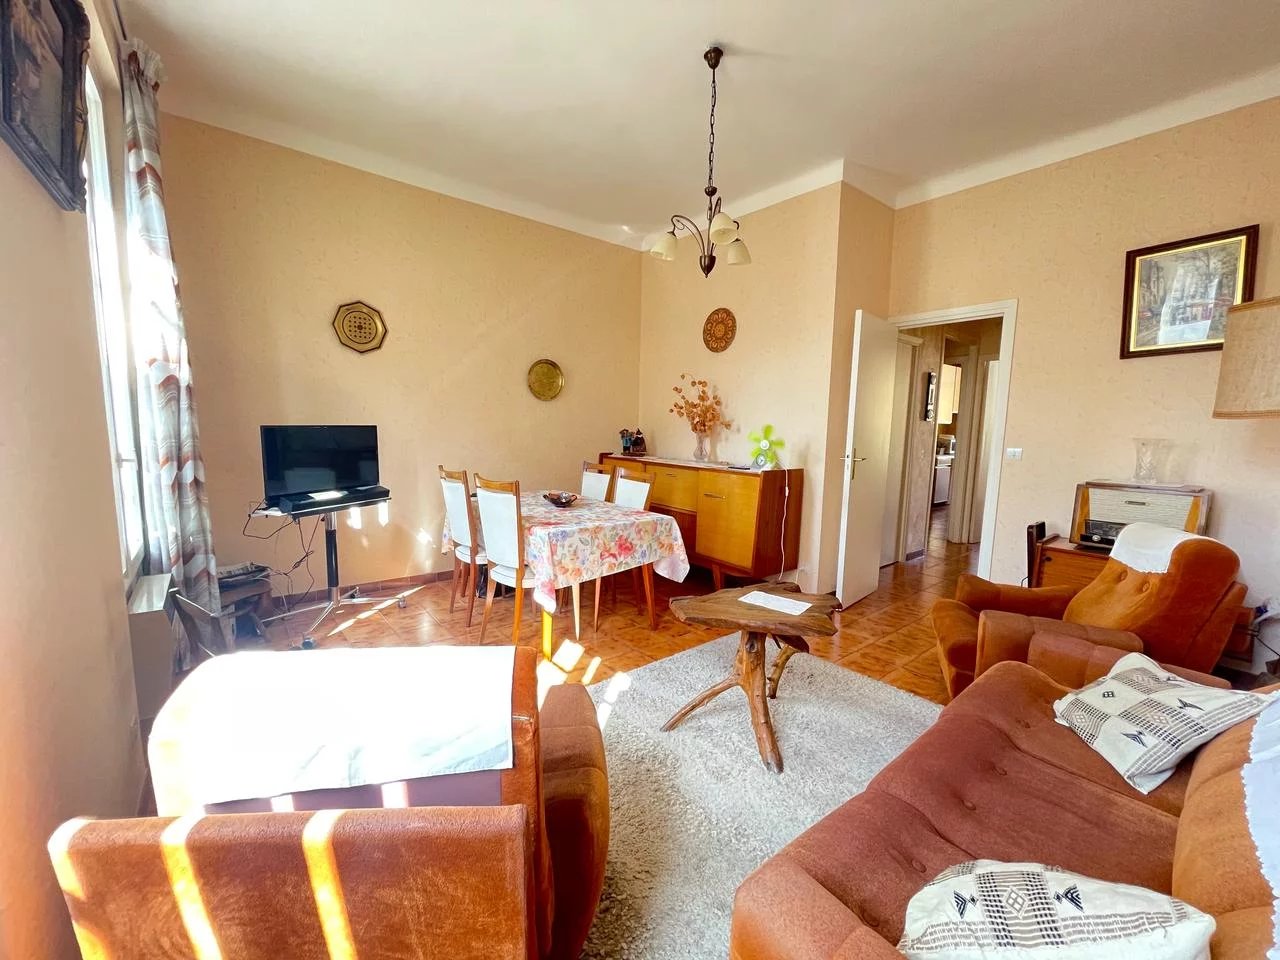 Appartement  4 Rooms 76.86m2  for sale   379 000 €